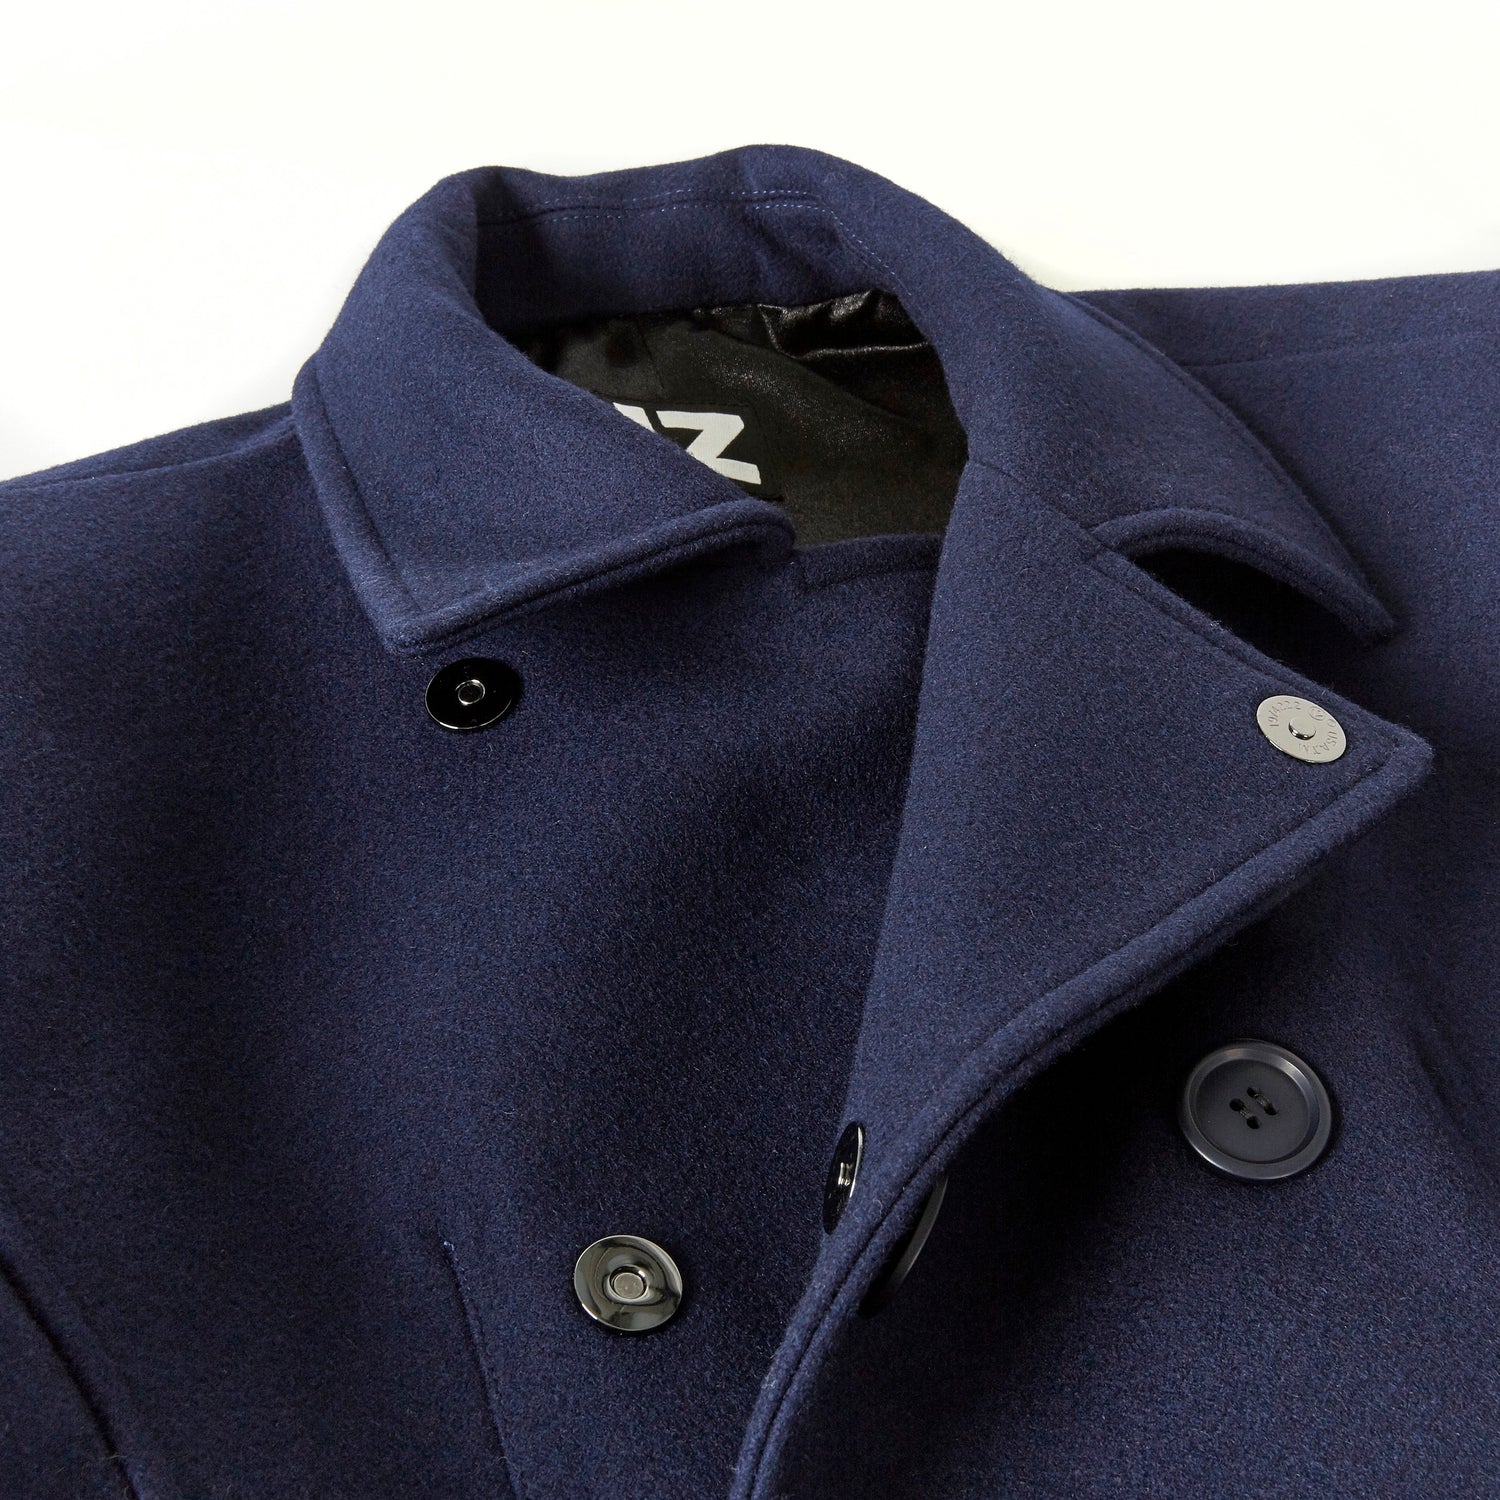 Functional Fashion: Shirts with Magnetic Buttons